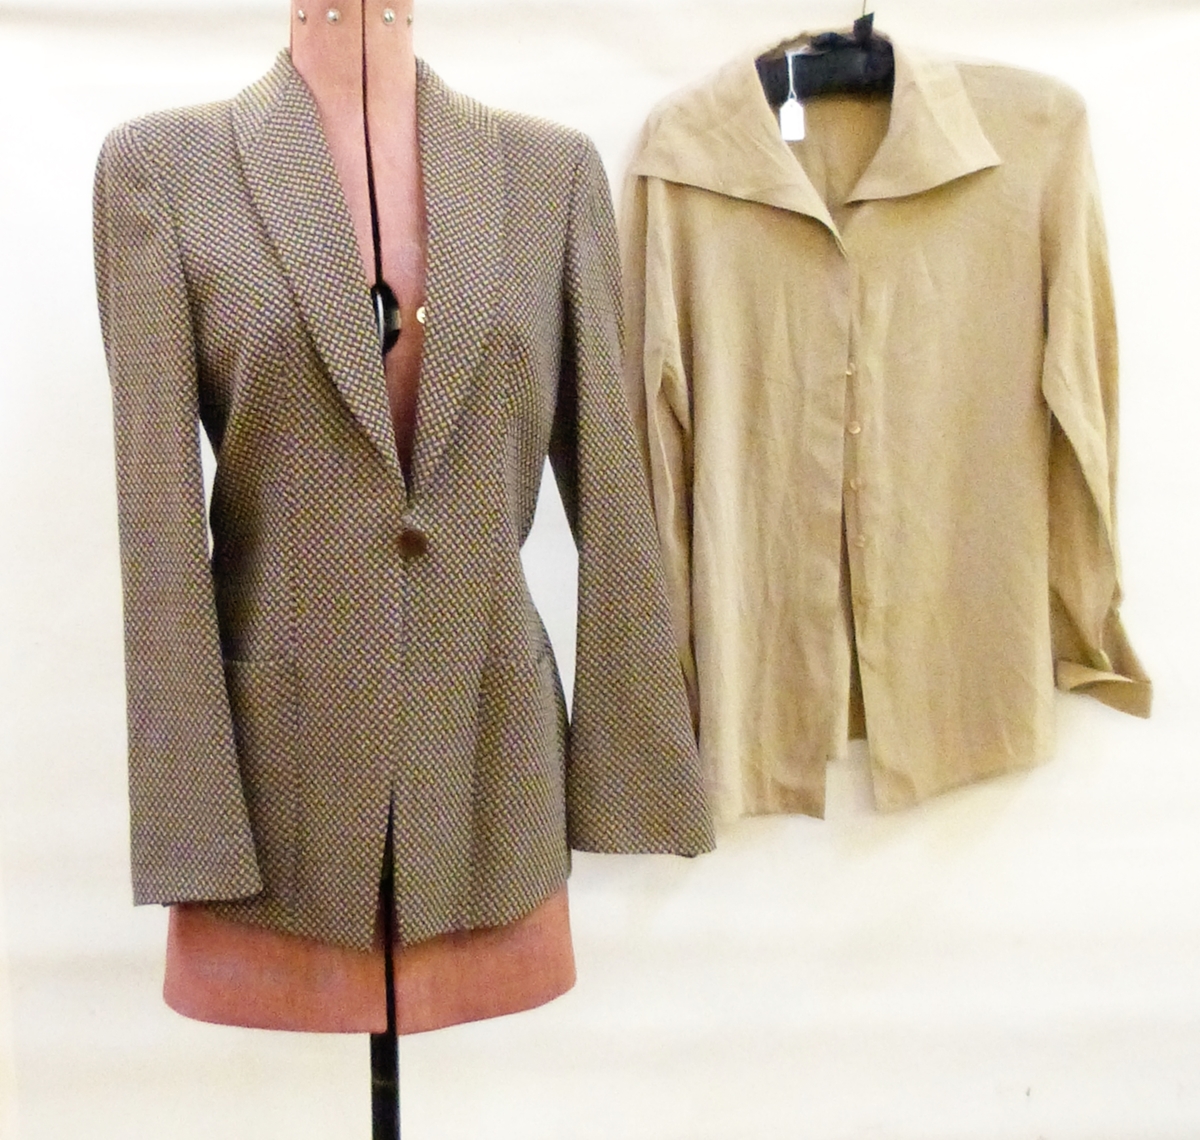 Giorgio Armani brown and cream tweed wool jacket with an Emporio Armani silk blouse and another,